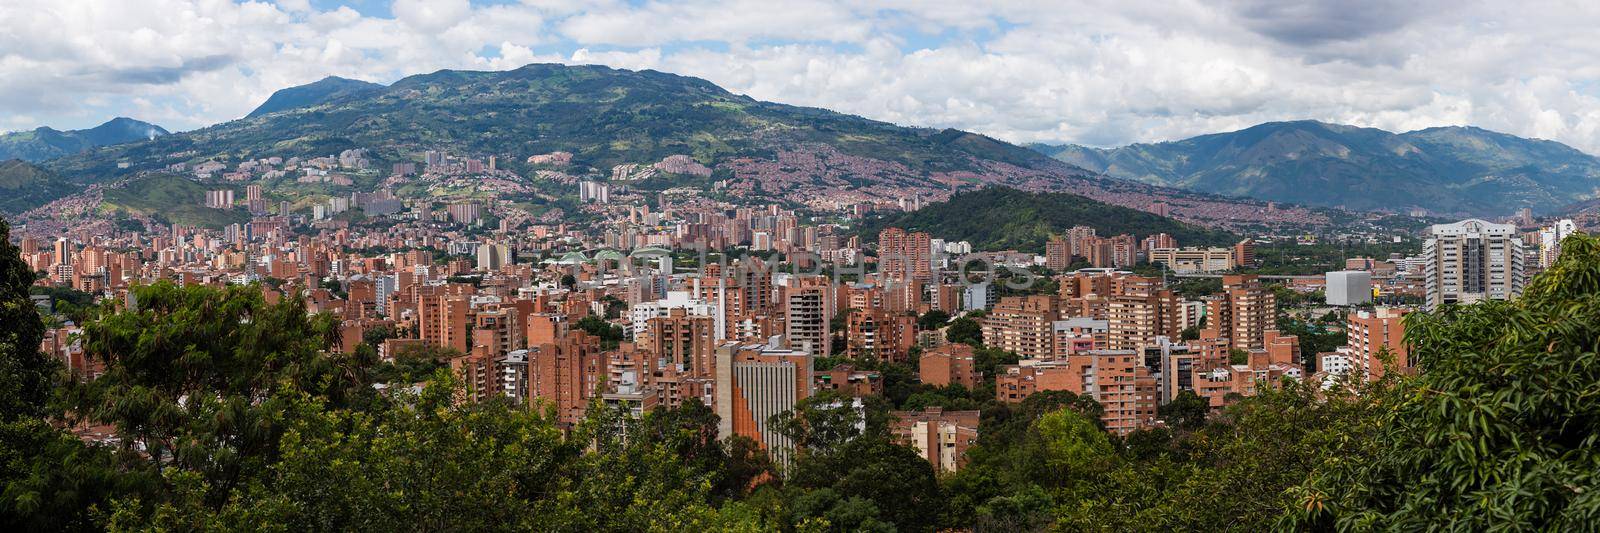 Rolling hills and village of Bogota Colombia. Panoramic view